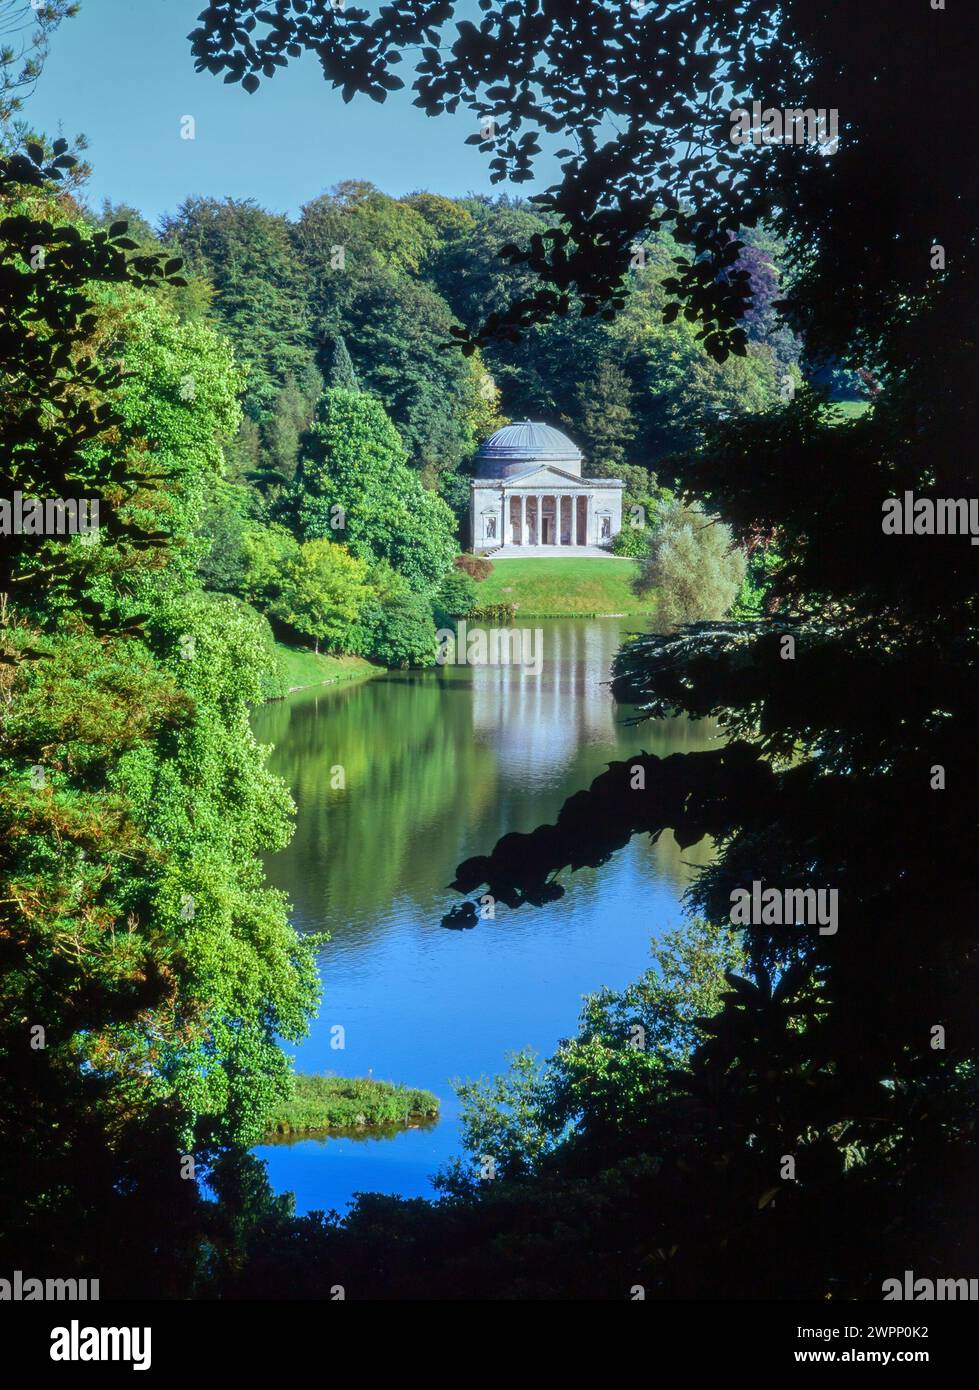 Glimpse view between trees of the lake and Pantheon in landscaped gardens at Stourhead, Wiltshire, England, UK Stock Photo